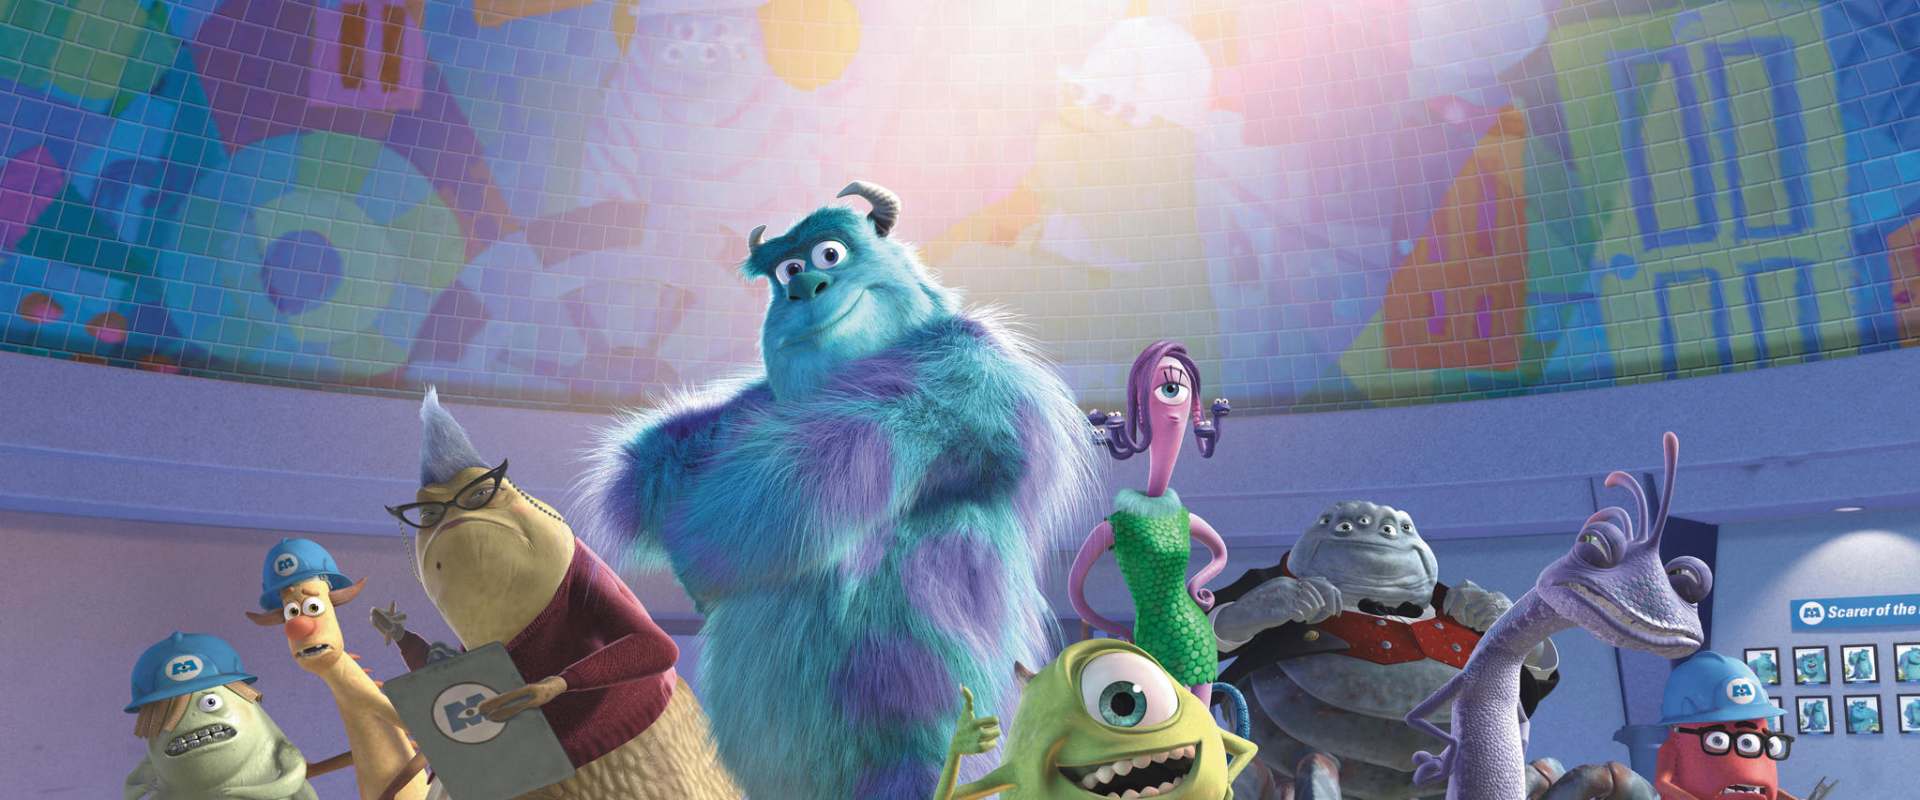 Monsters, Inc. background 1